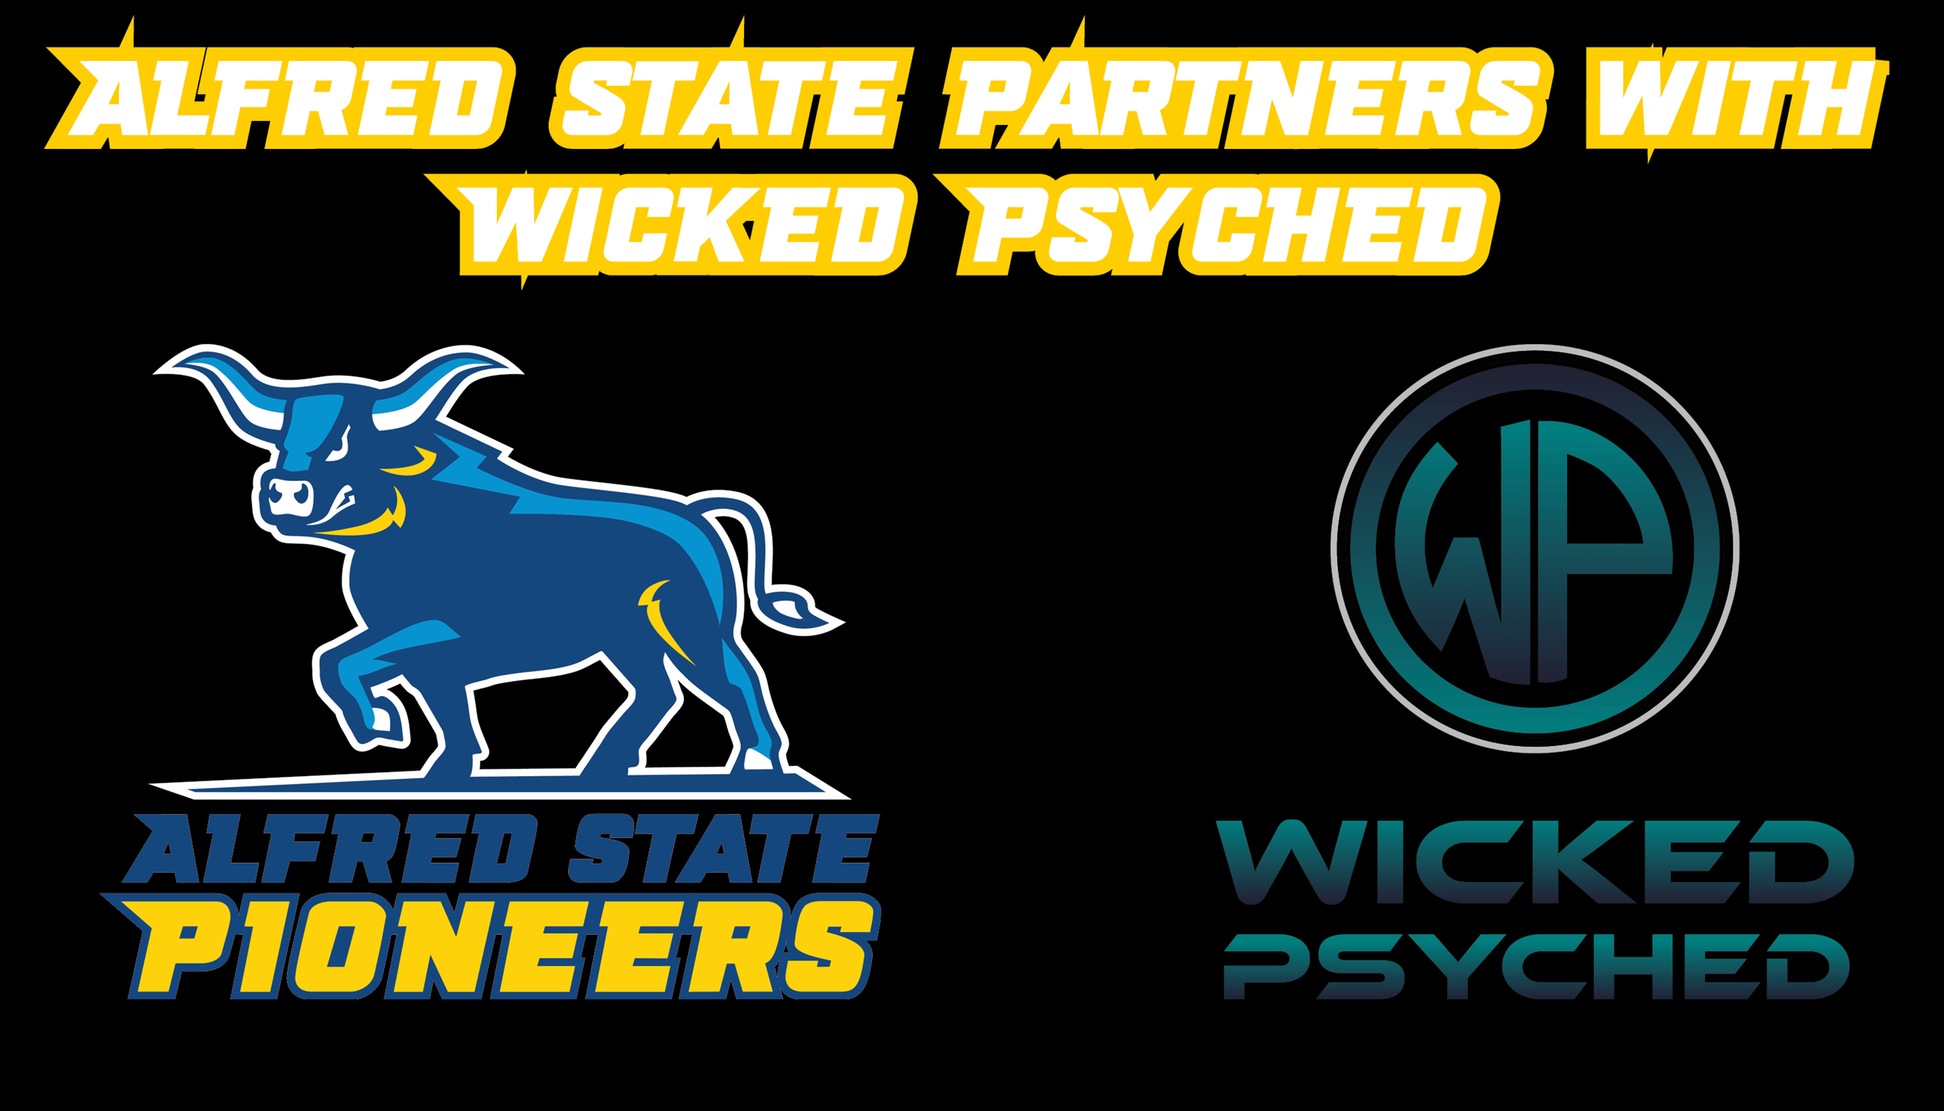 Alfred State partners with Wicked Psyched - pictured is the Alfred State athletic logo and the logo for Wicked Psyched